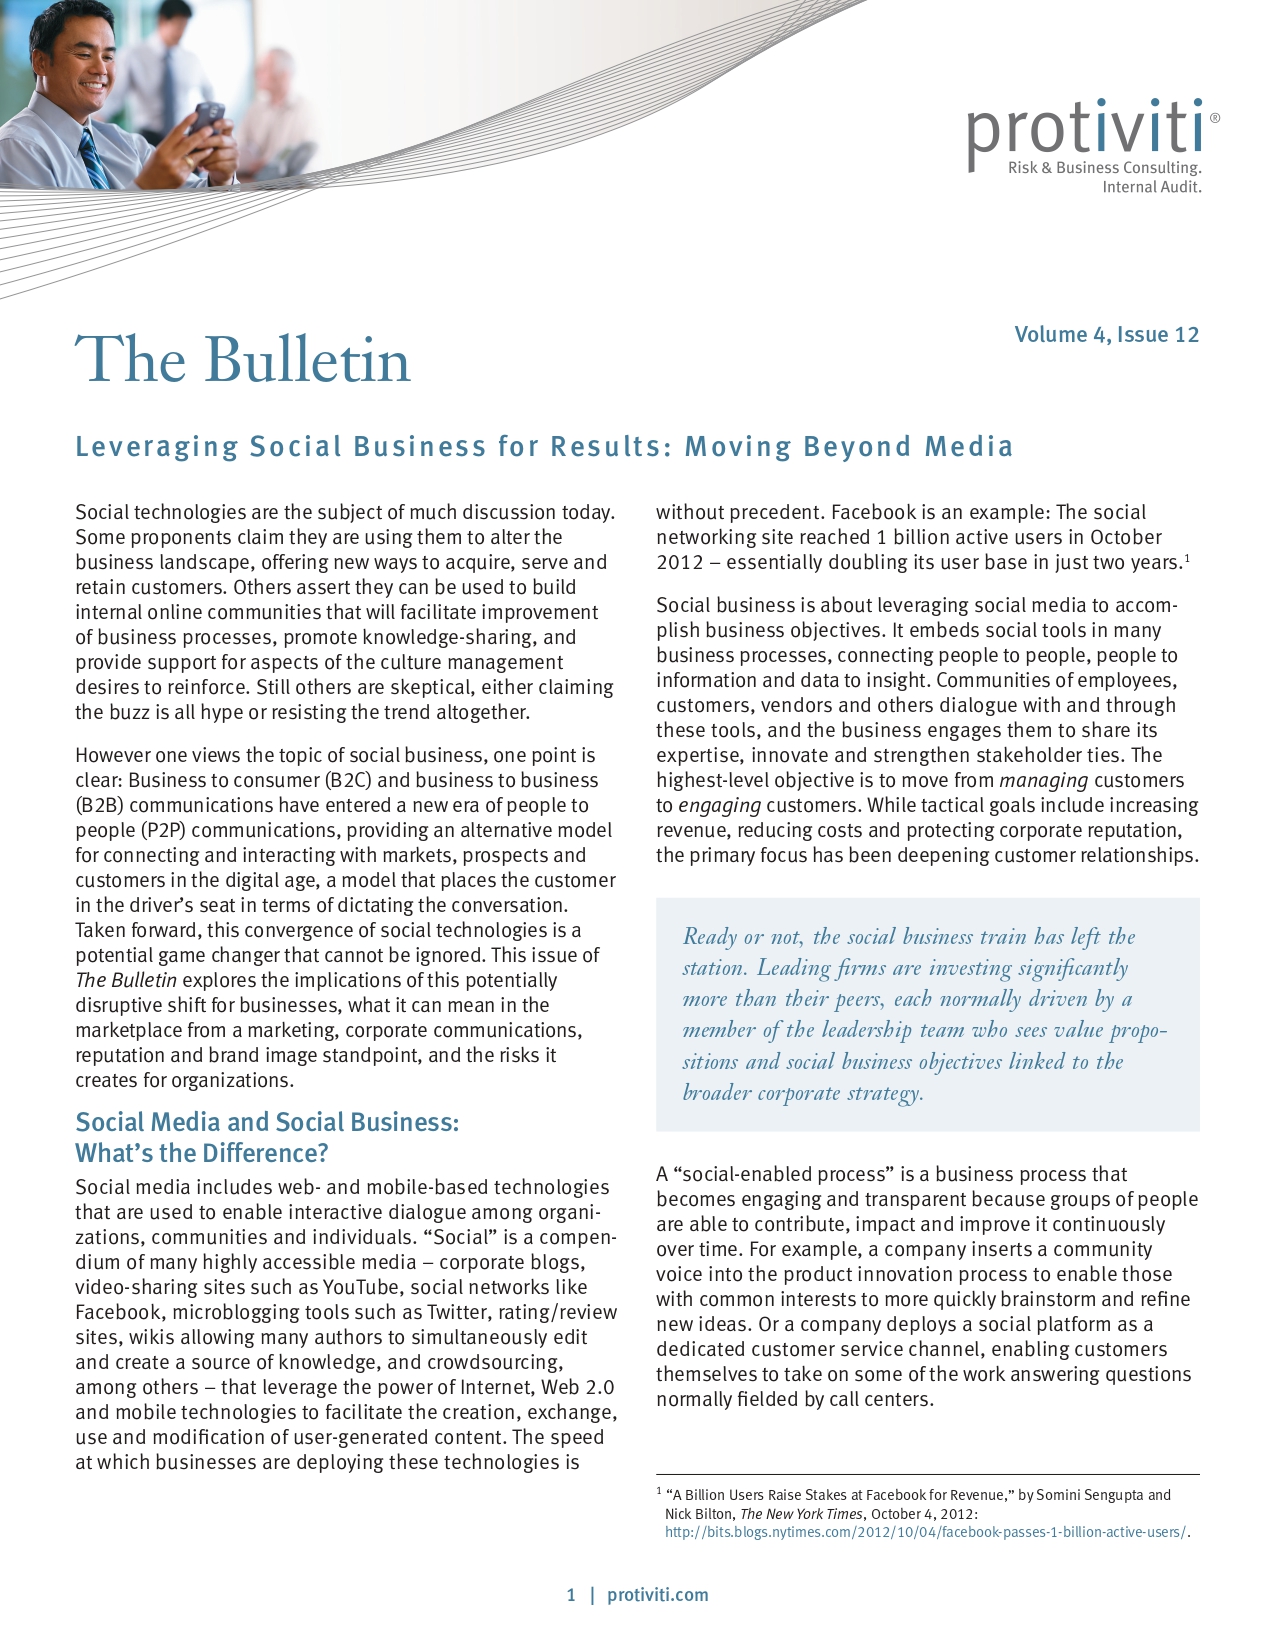 Leveraging Social Business for Results Moving Beyond Media